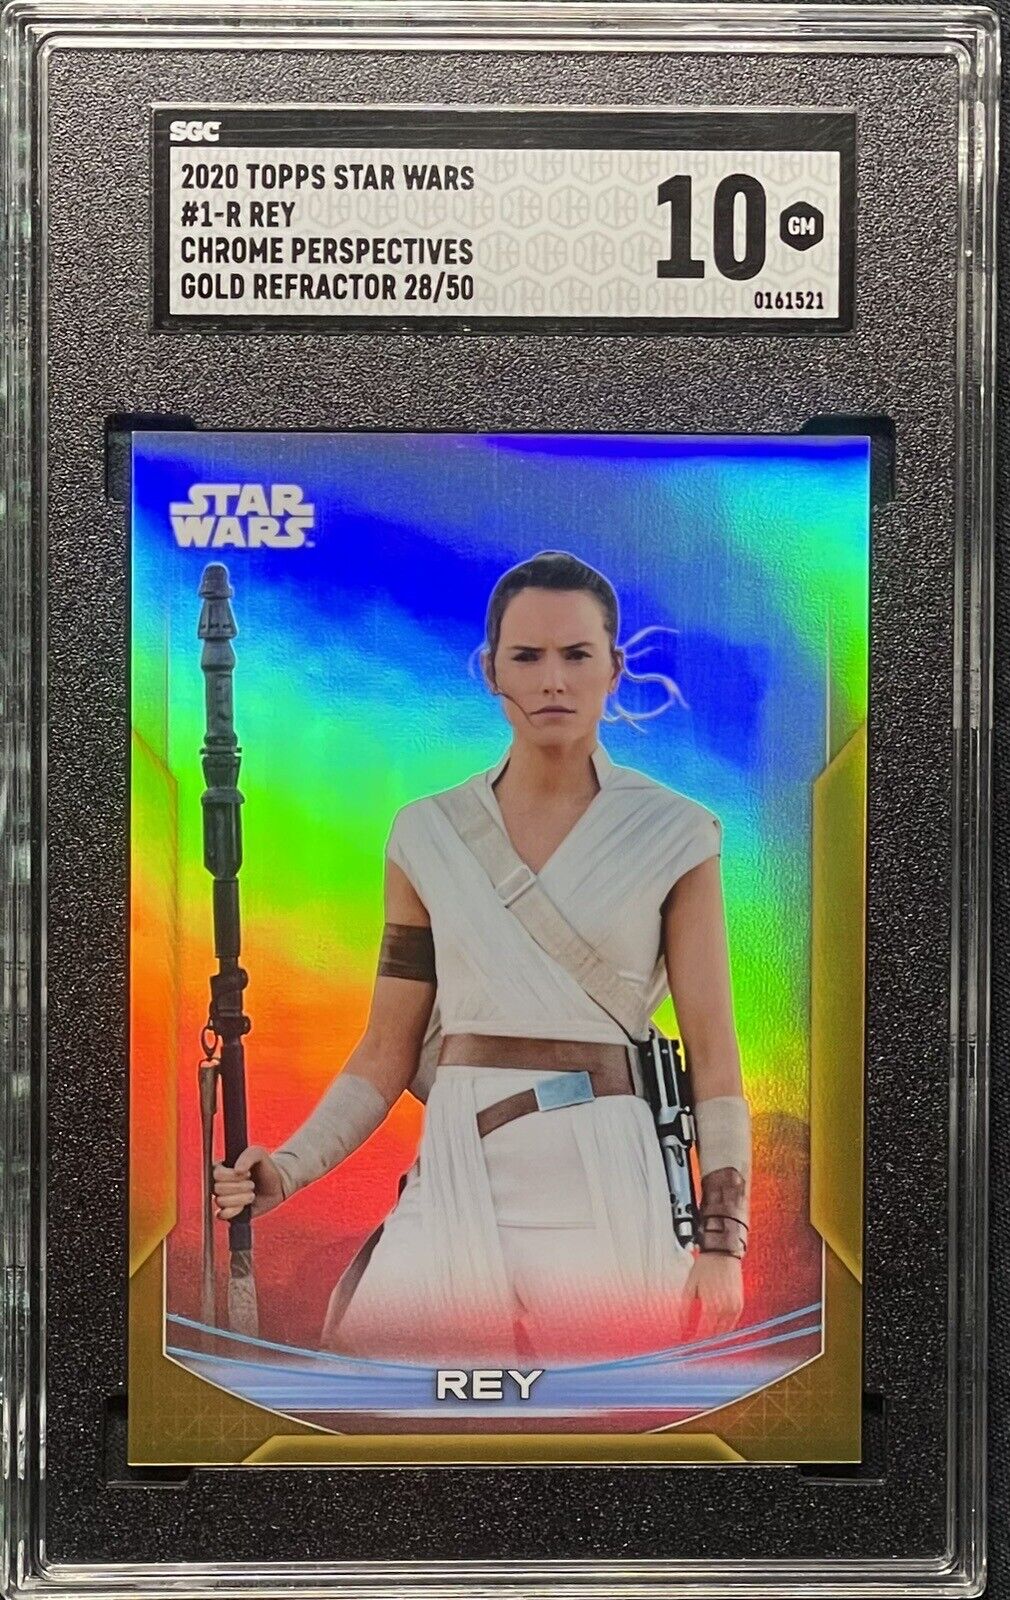 2020 Topps Star Wars Chrome Perspectives #1-R Rey Gold Refractor /50 SGC 10 🎆